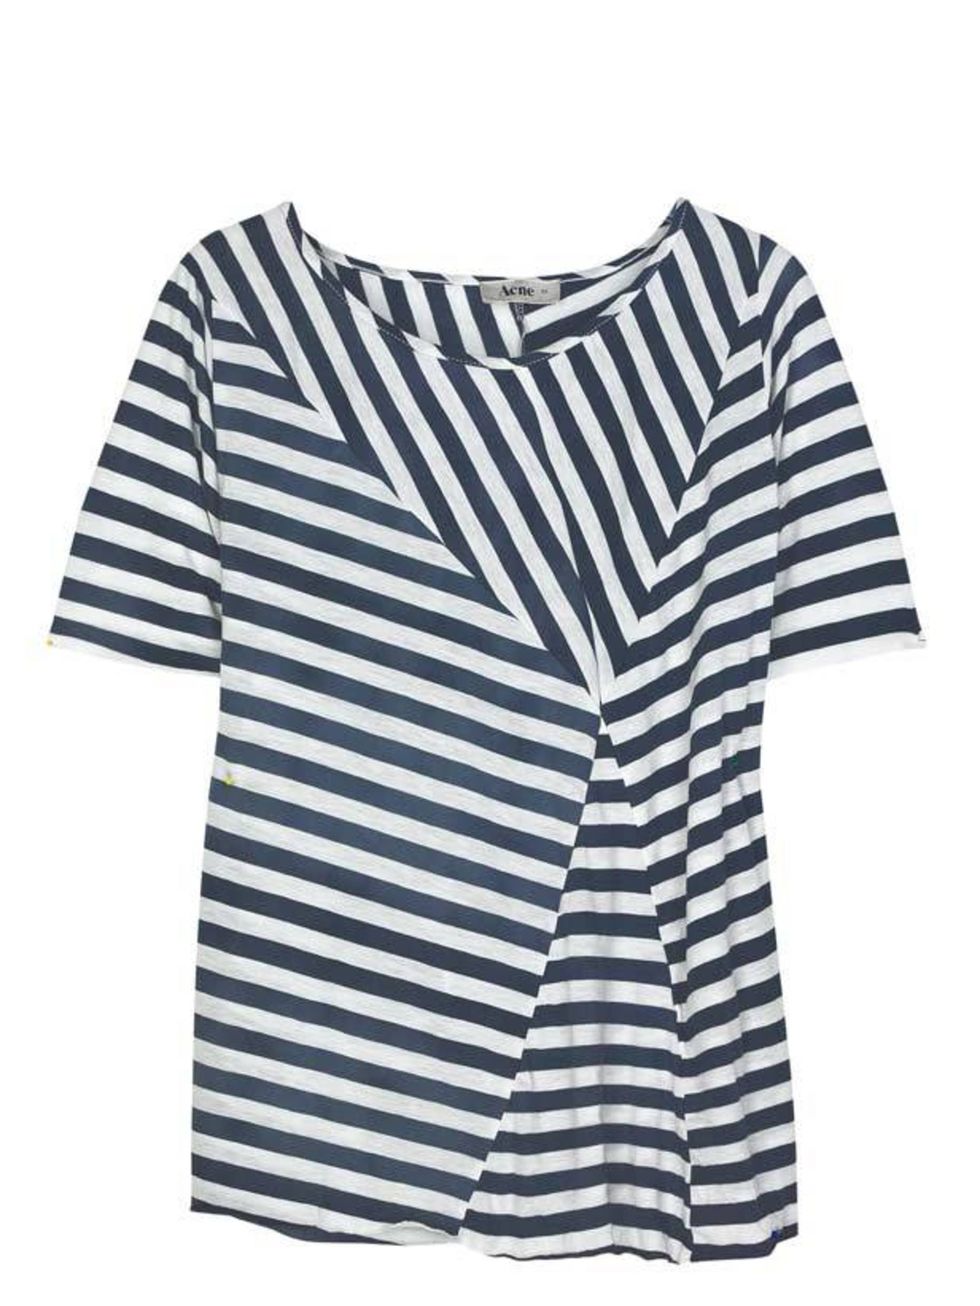 <p>Abstract stripe T-shirt, £75, by Acne at <a href="http://www.net-a-porter.com/product/63032">Net-a-Porter </a></p>